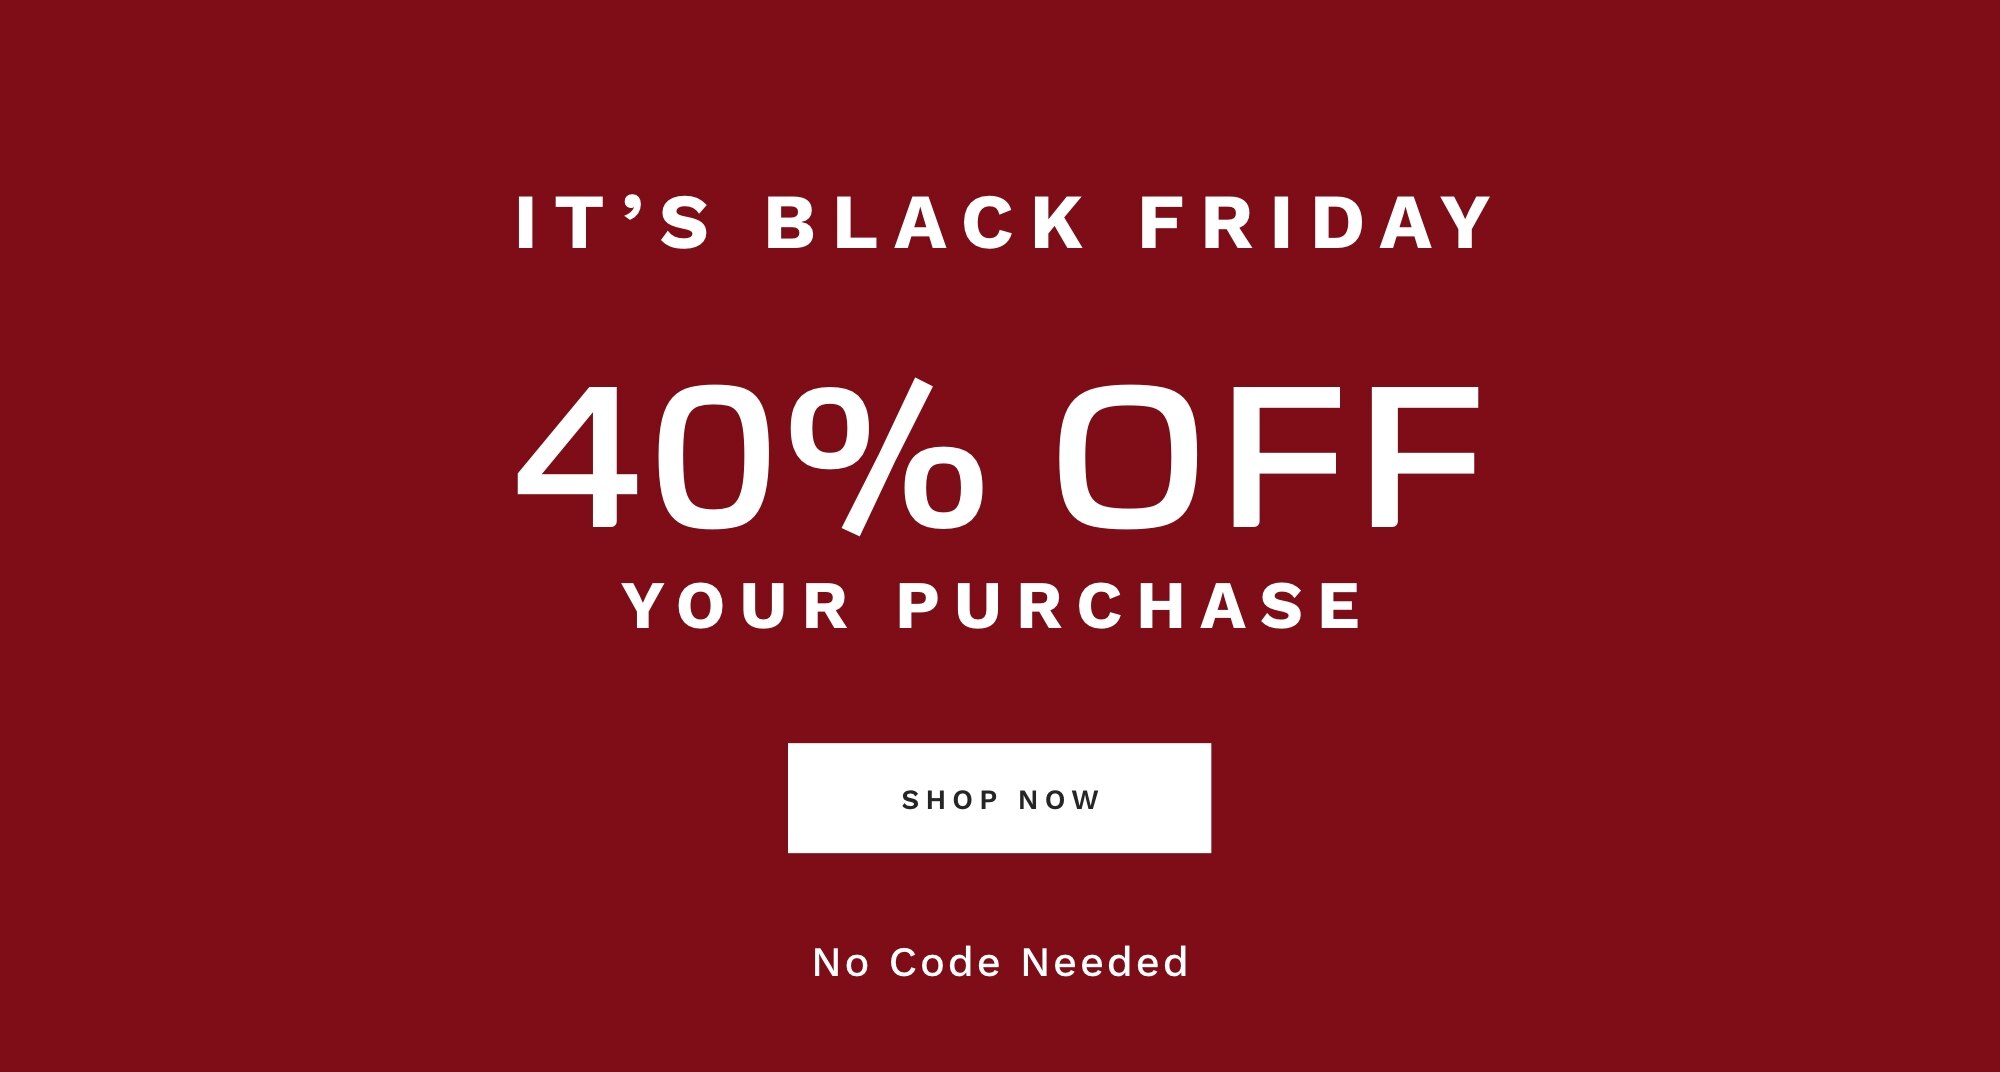 IT'S BLACK FRIDAY 40% OFF YOUR PURCHASE No Code Needed SHOP NOW